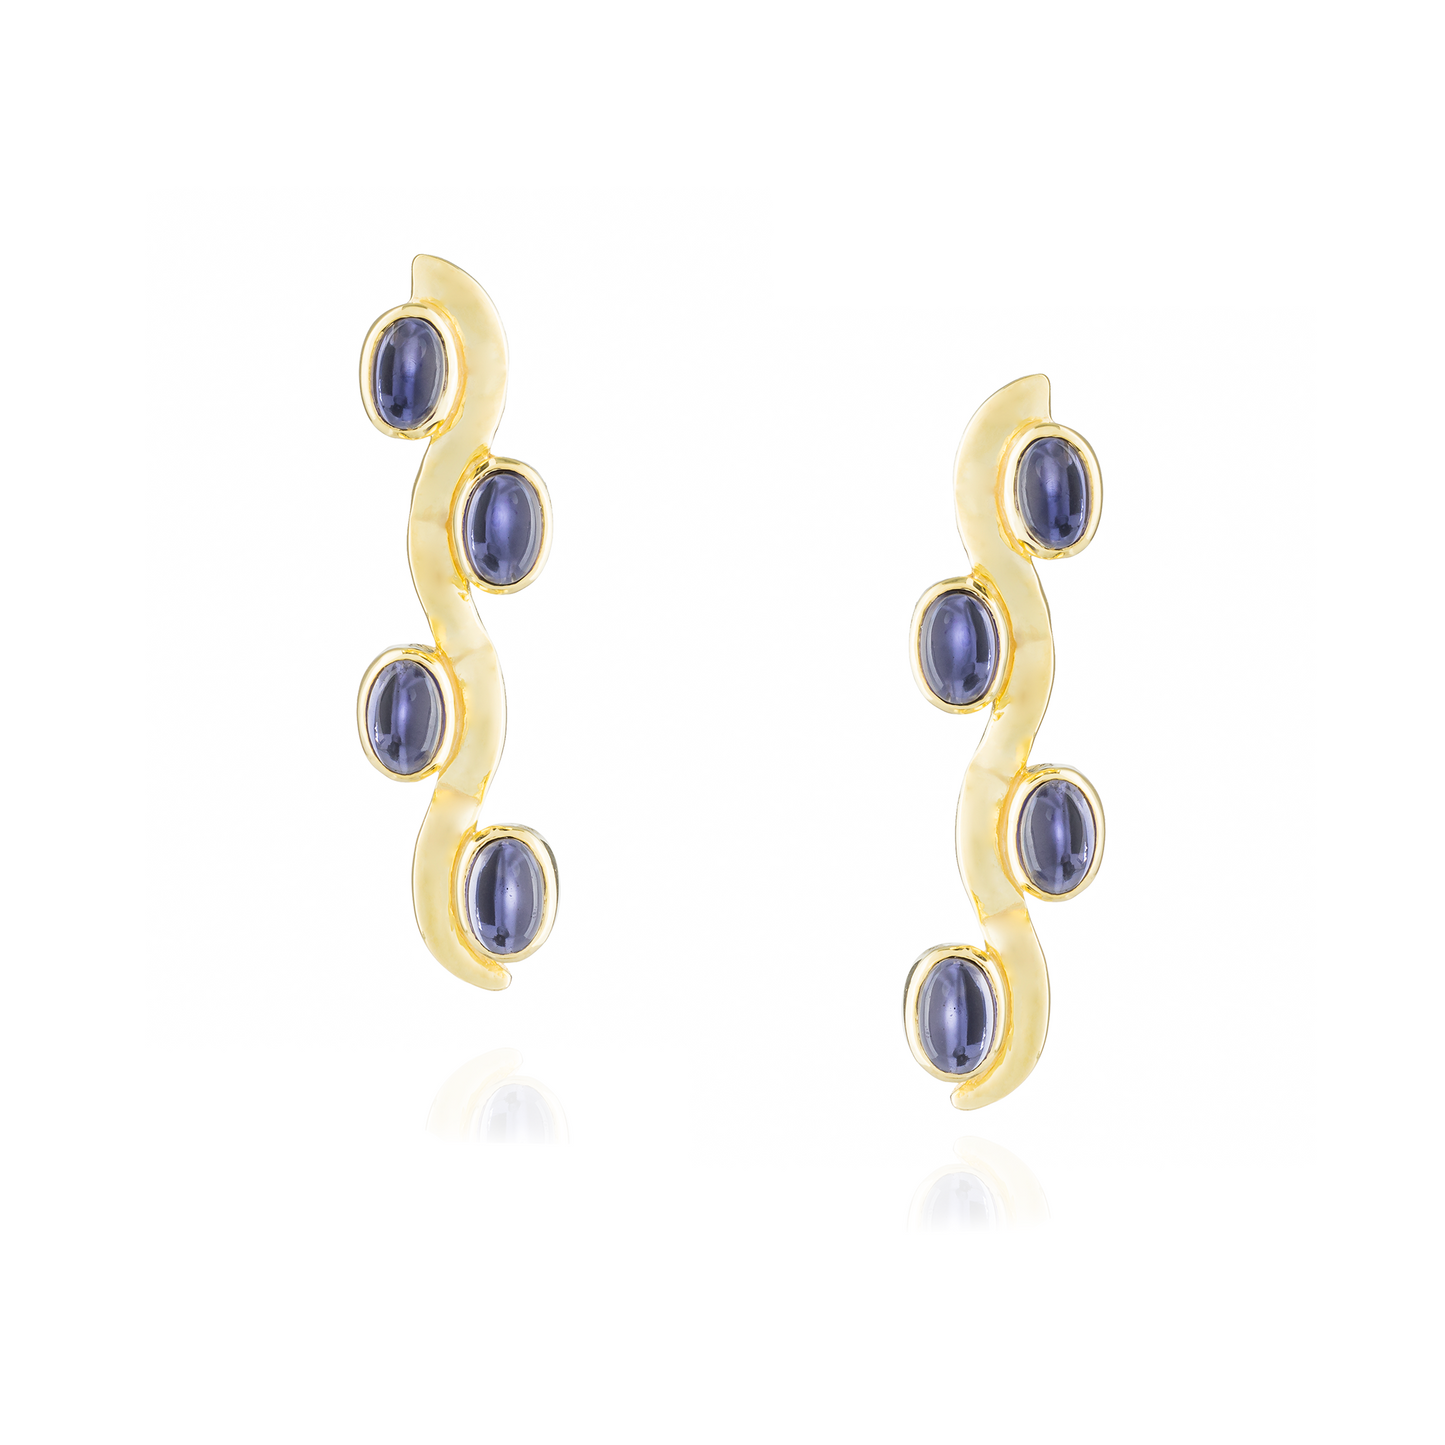 Load image into Gallery viewer, Caramelo 925 Silver Earrings plated in 18k Yellow Gold with Iolite Cabouchon
